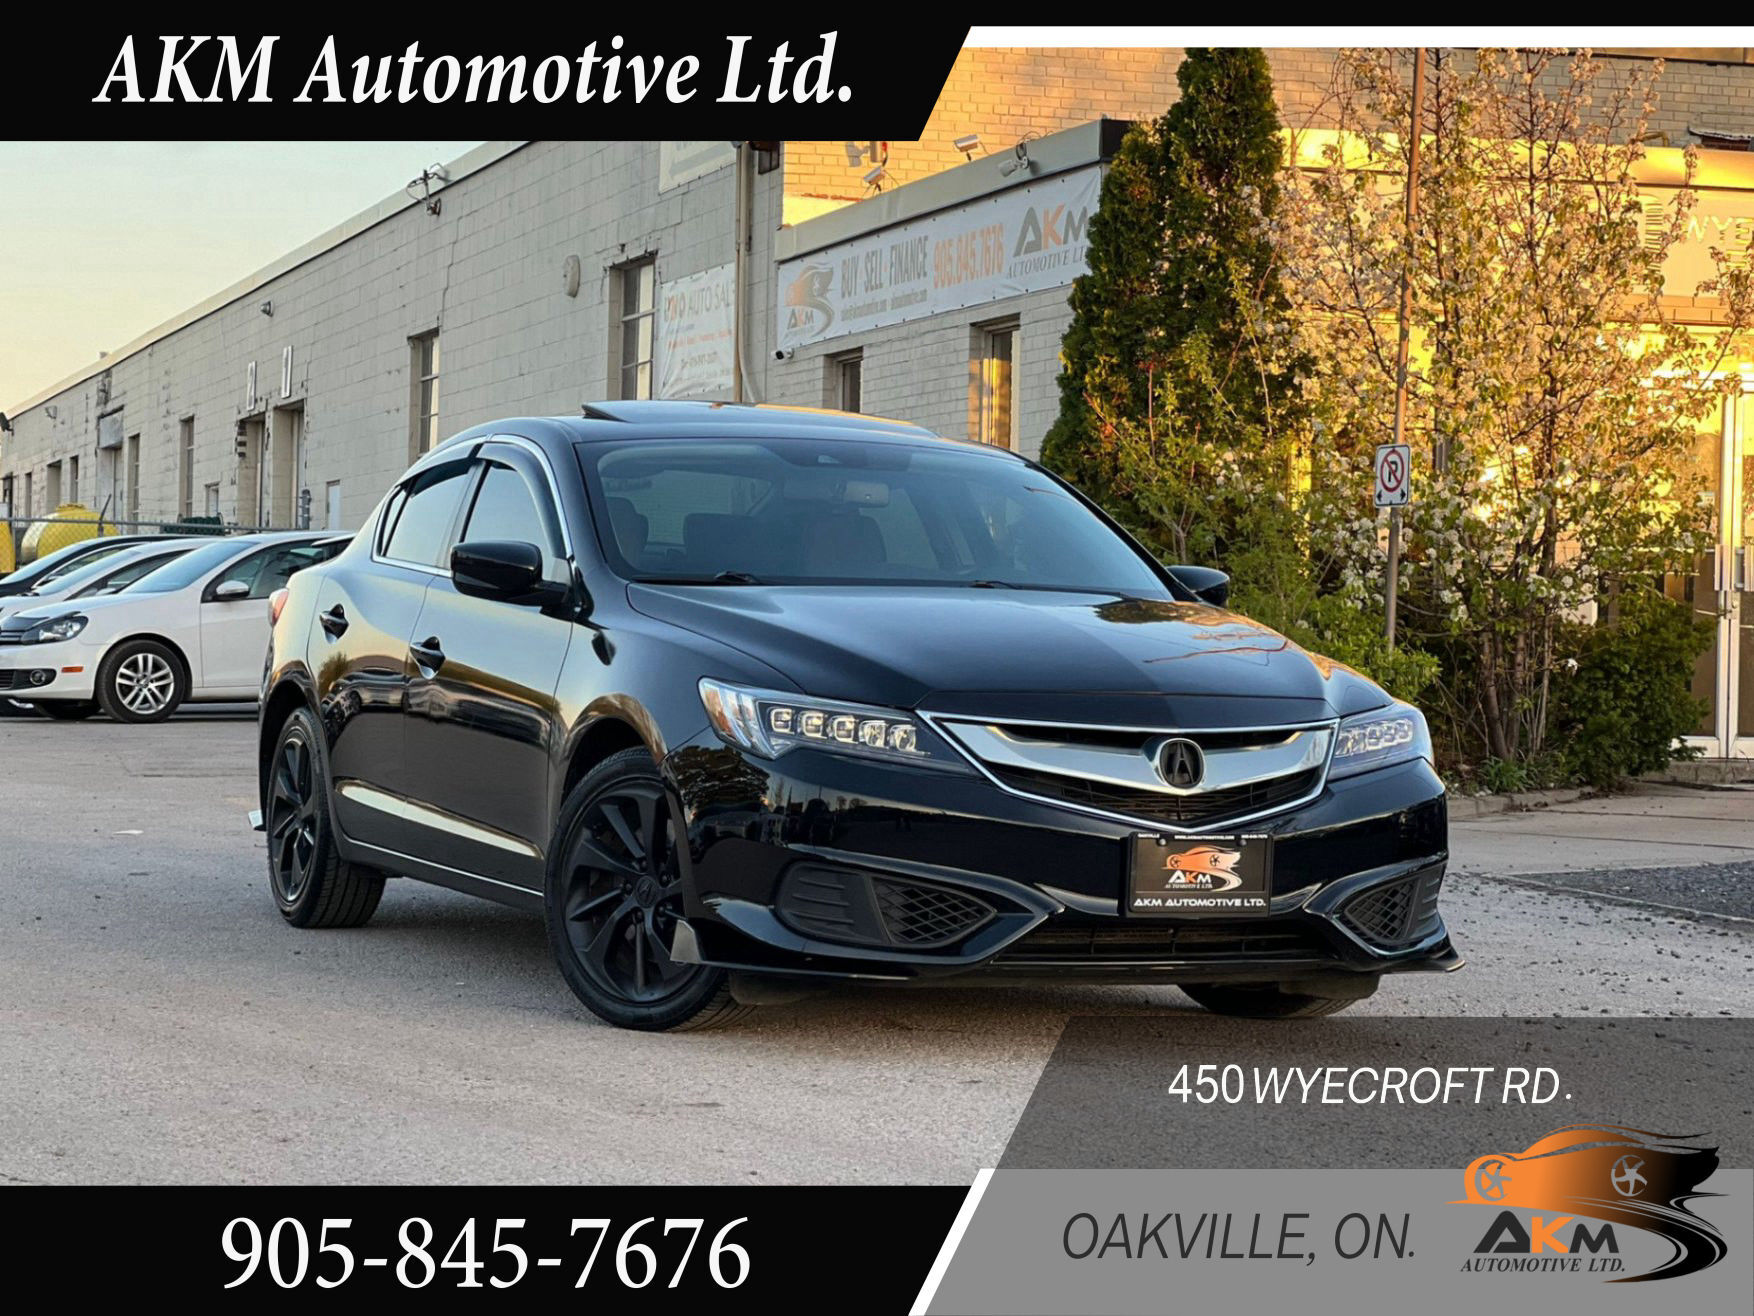 2017 Acura ILX 4dr Sdn Technology Pkg, Certified